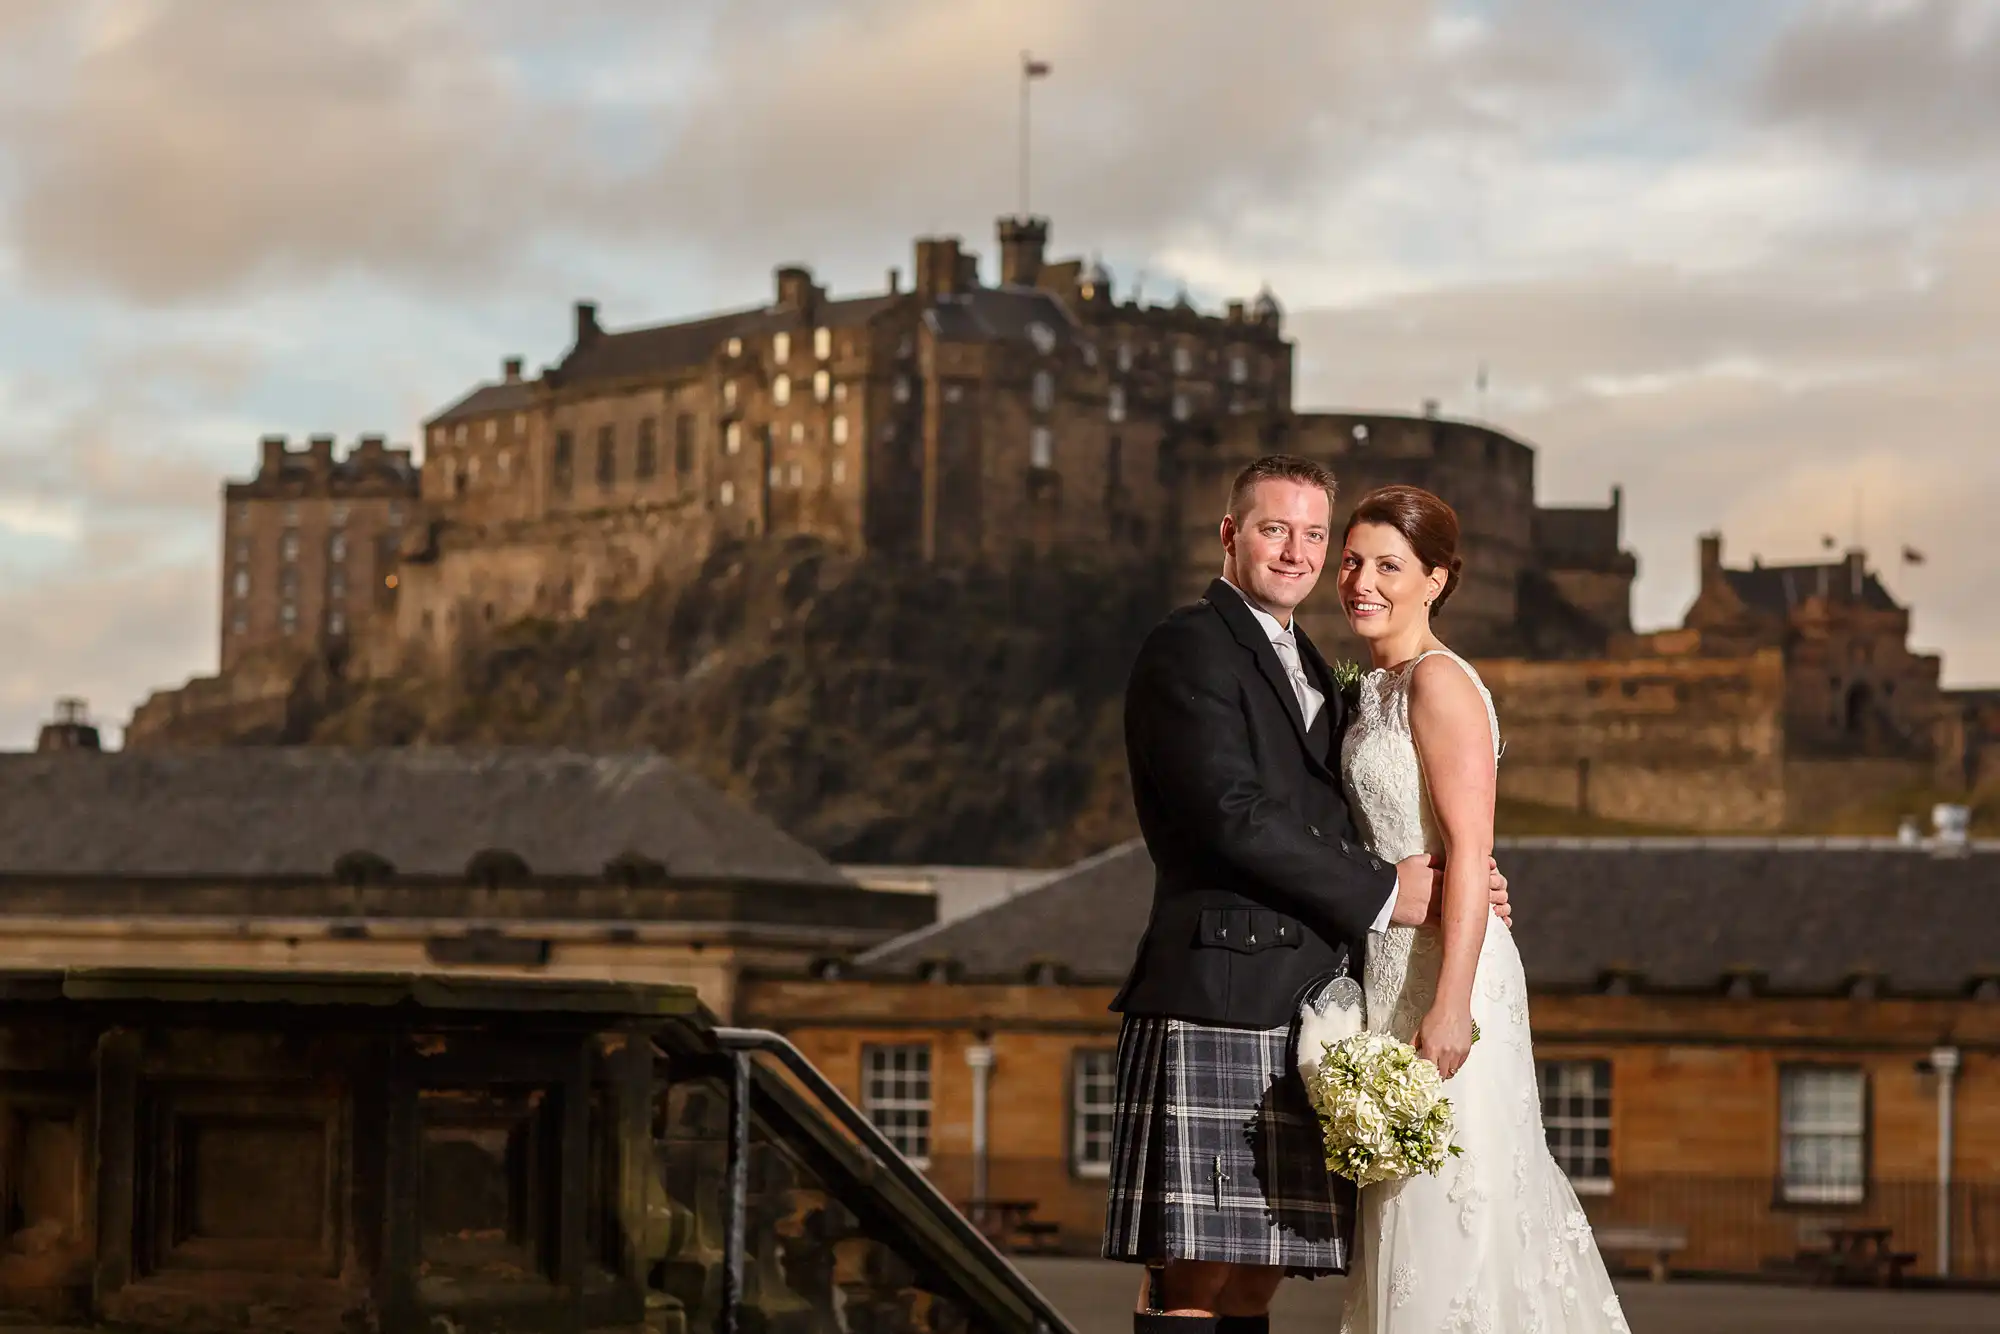 A newlywed couple posing in front of edinburgh castle, the groom in a kilt and the bride holding a bouquet.